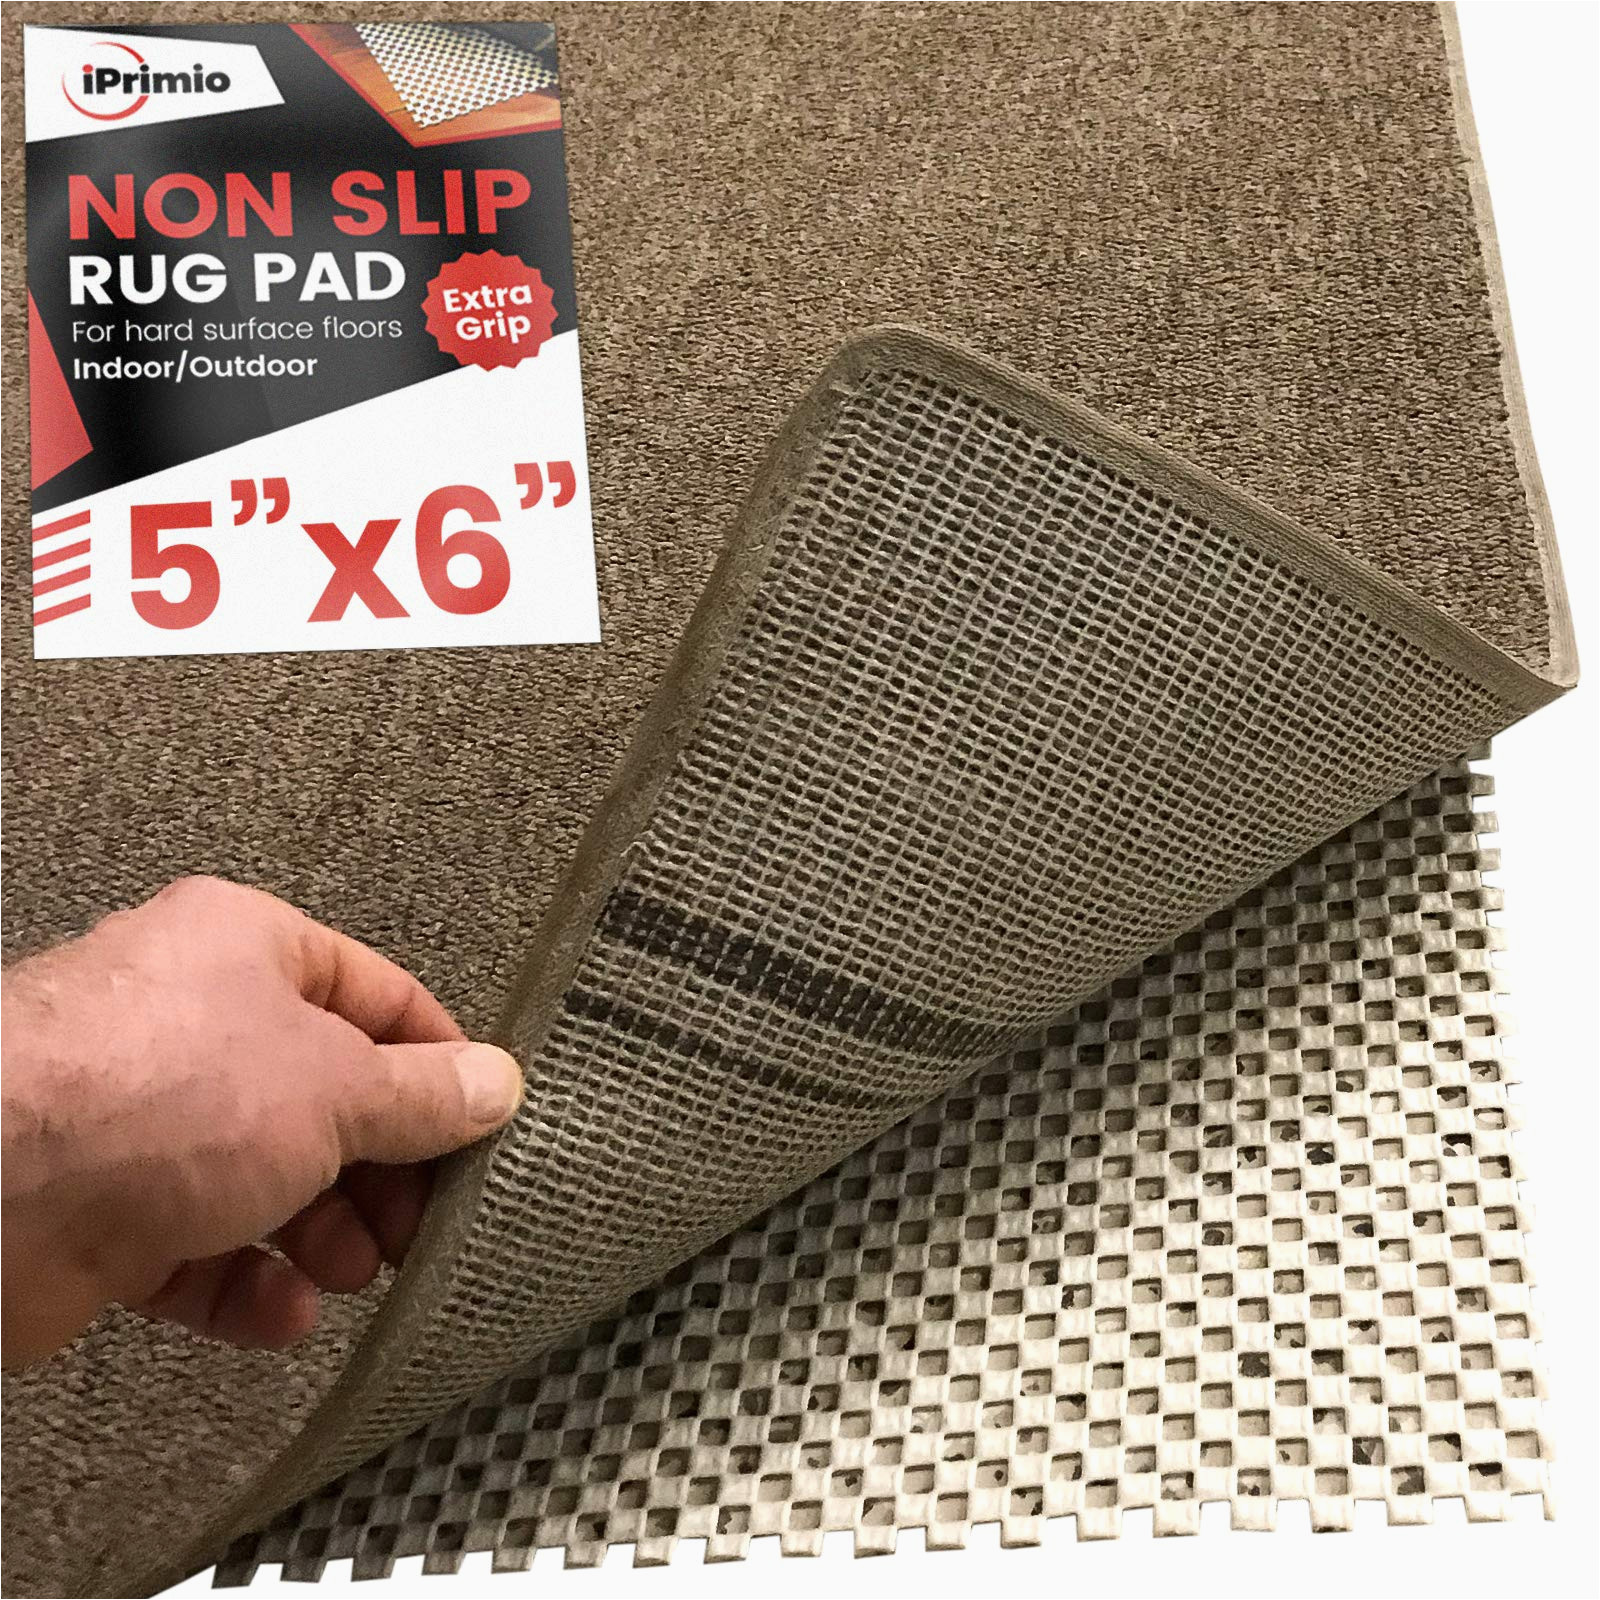 Rug Gripper Bed Bath and Beyond Iprimio Non Slip area Rug Gripper Pad 5×6 for Bathroom, Indoor, Kitchen and Outdoor area – Extra Grip for Hard Surface Floors